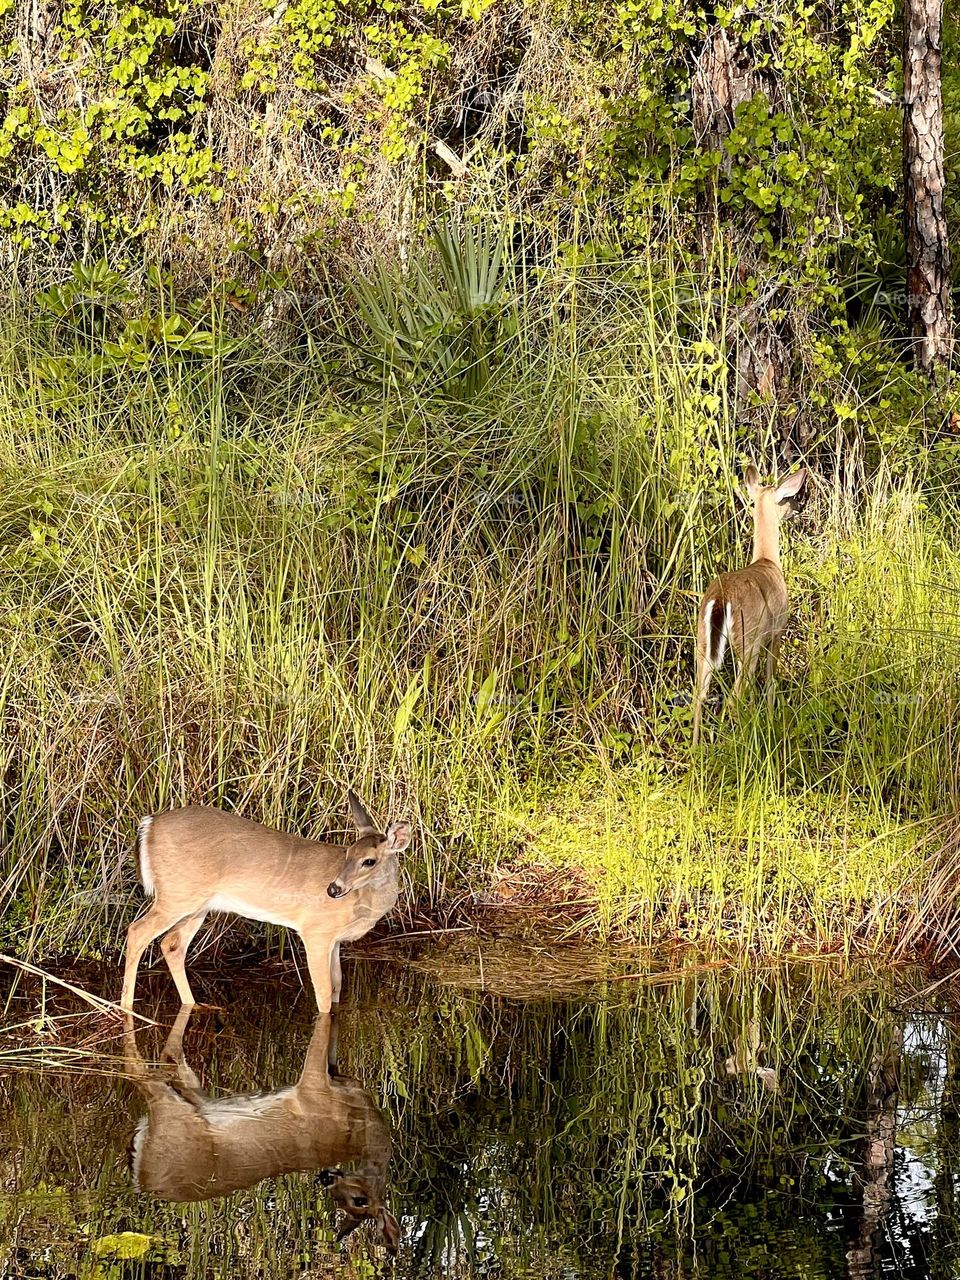 Two young whitetail female deer near the edge of a pond. Late afternoon sunlight creates warm shadows and reflection as they stop for a drink before walking back into the forest.